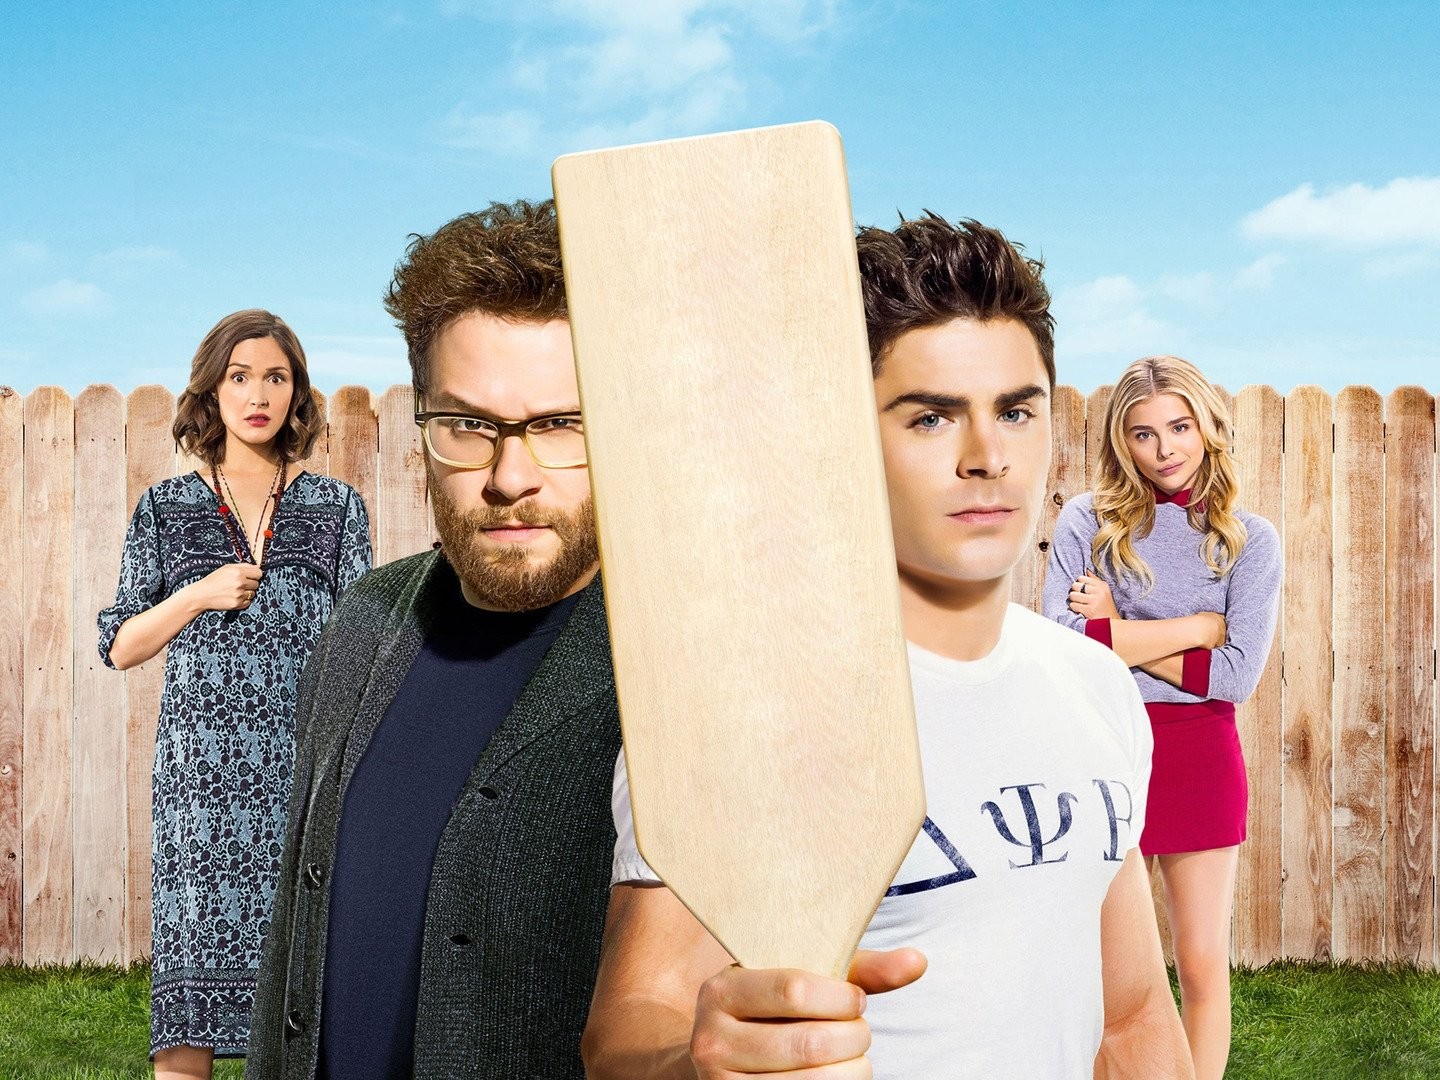 Neighbors 2' Trailer Is Hilarious With the Return of Zac Efron (Who Still  Can't Find His Shirt)